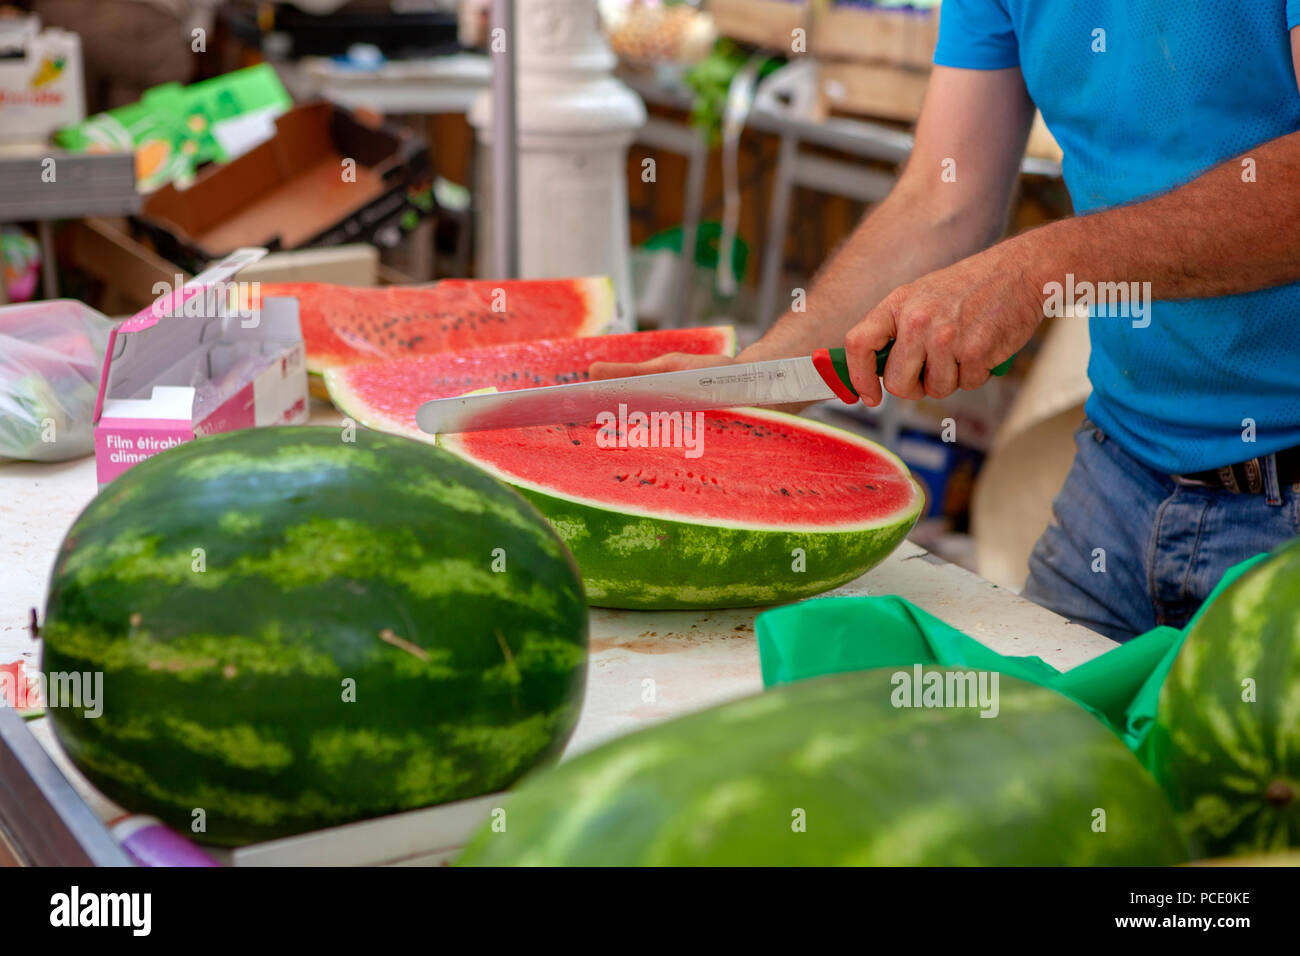 Fruit seller cutting and slicing water melon and putting for sale on a French market stall in Toulon southern France Stock Photo